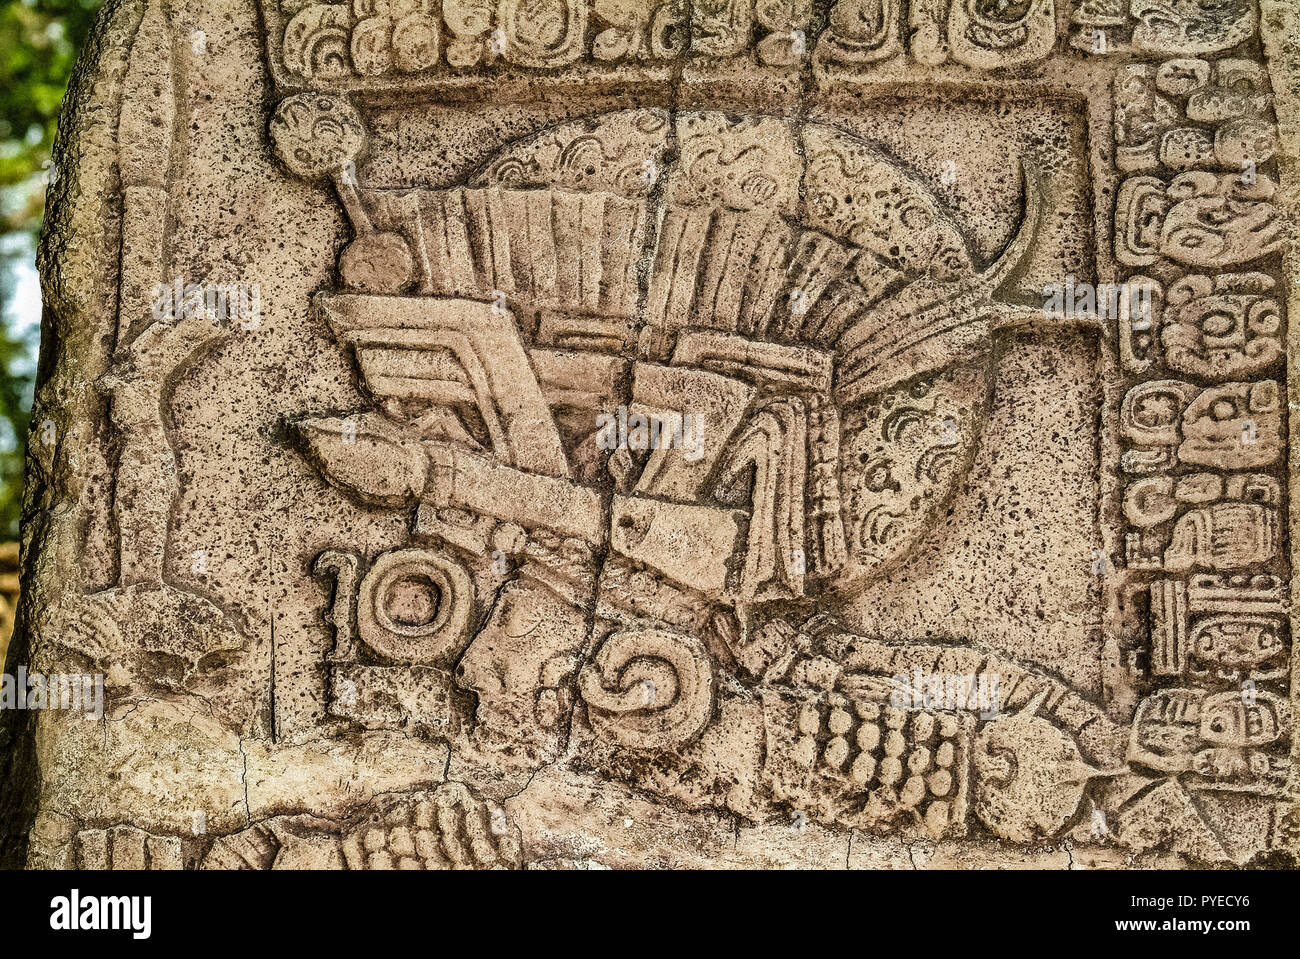 Guatemala Aguateca, particular stele king's conquest of Ceibal against the king of the name AguatecaÂ the name of the king is Balam Chan Cahuil Stock Photo